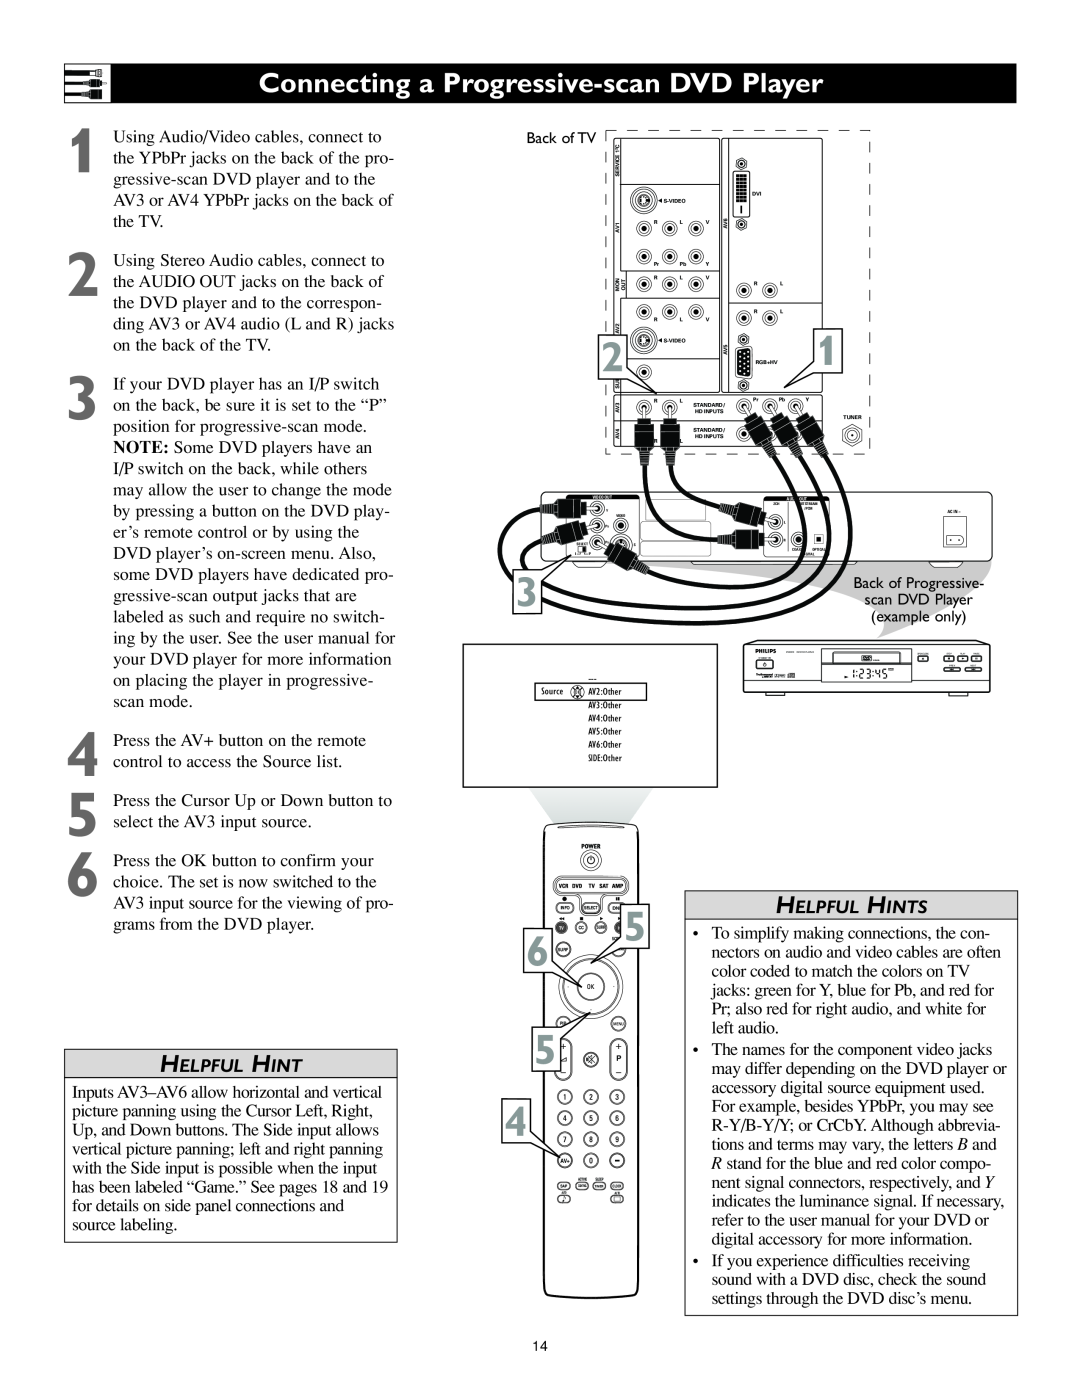 Philips 62PL9524, 55PL9524 setup guide Connecting a Progressive-scan DVD Player, Helpful Hints 